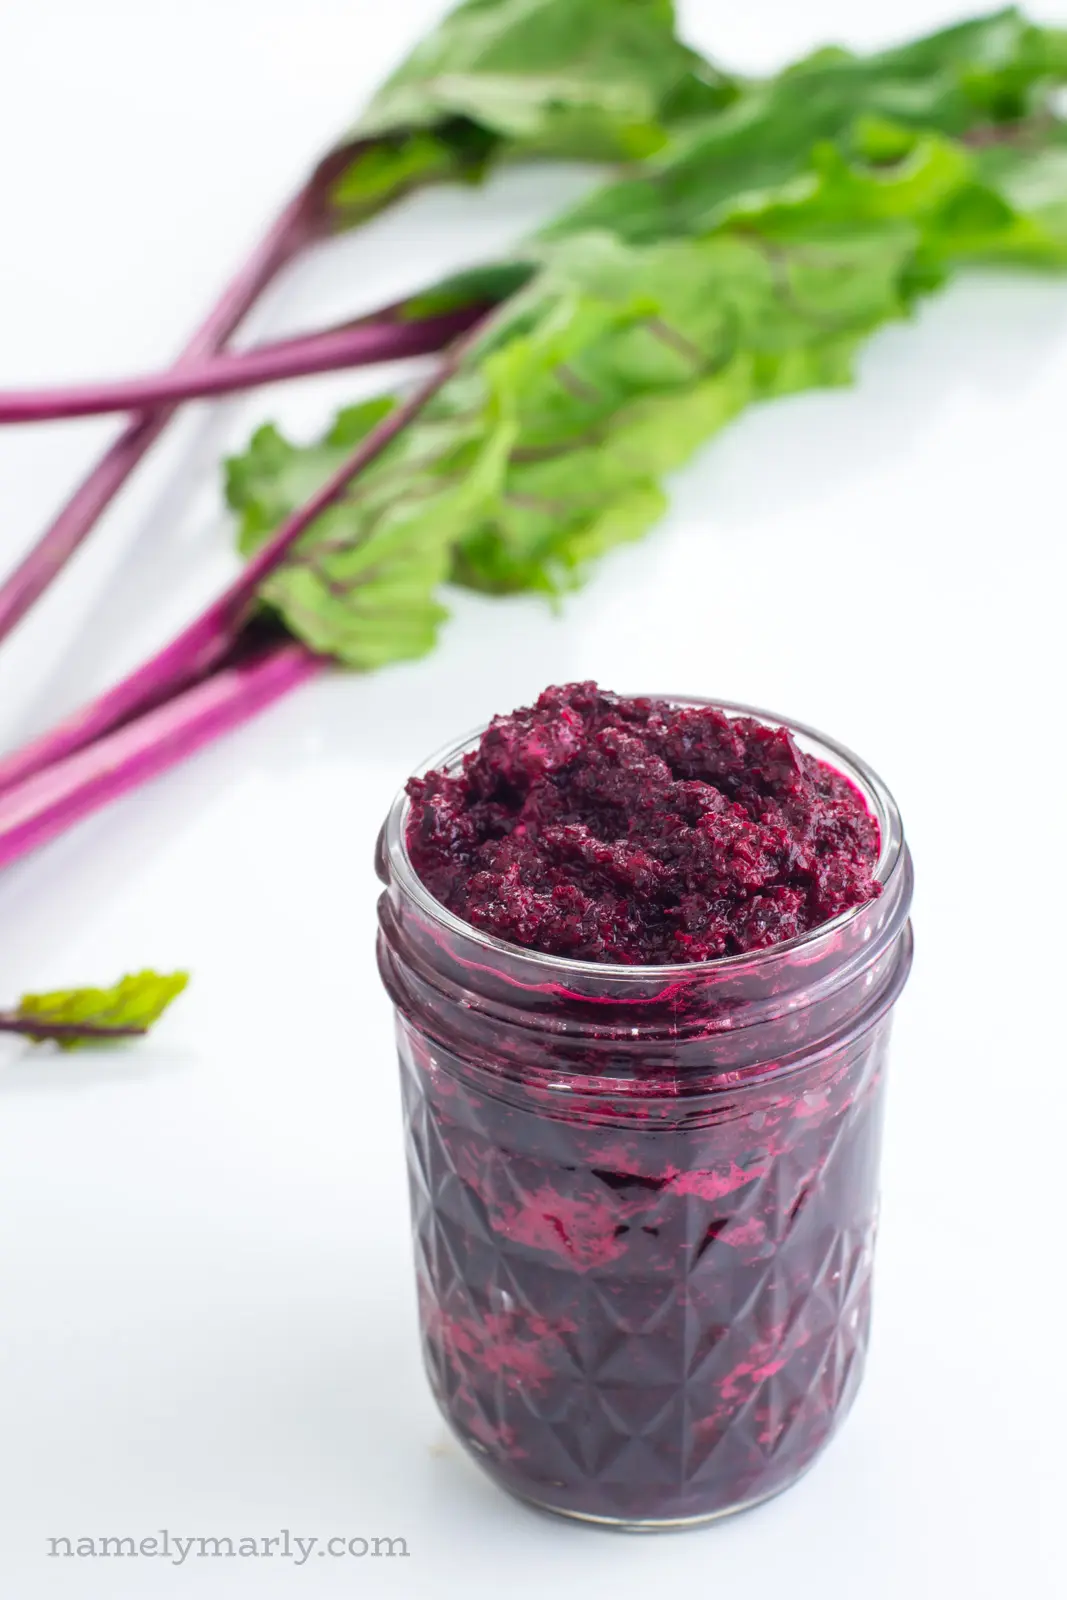 A jar of bright red mashed beets sits next to beet greens with bright pink stems.